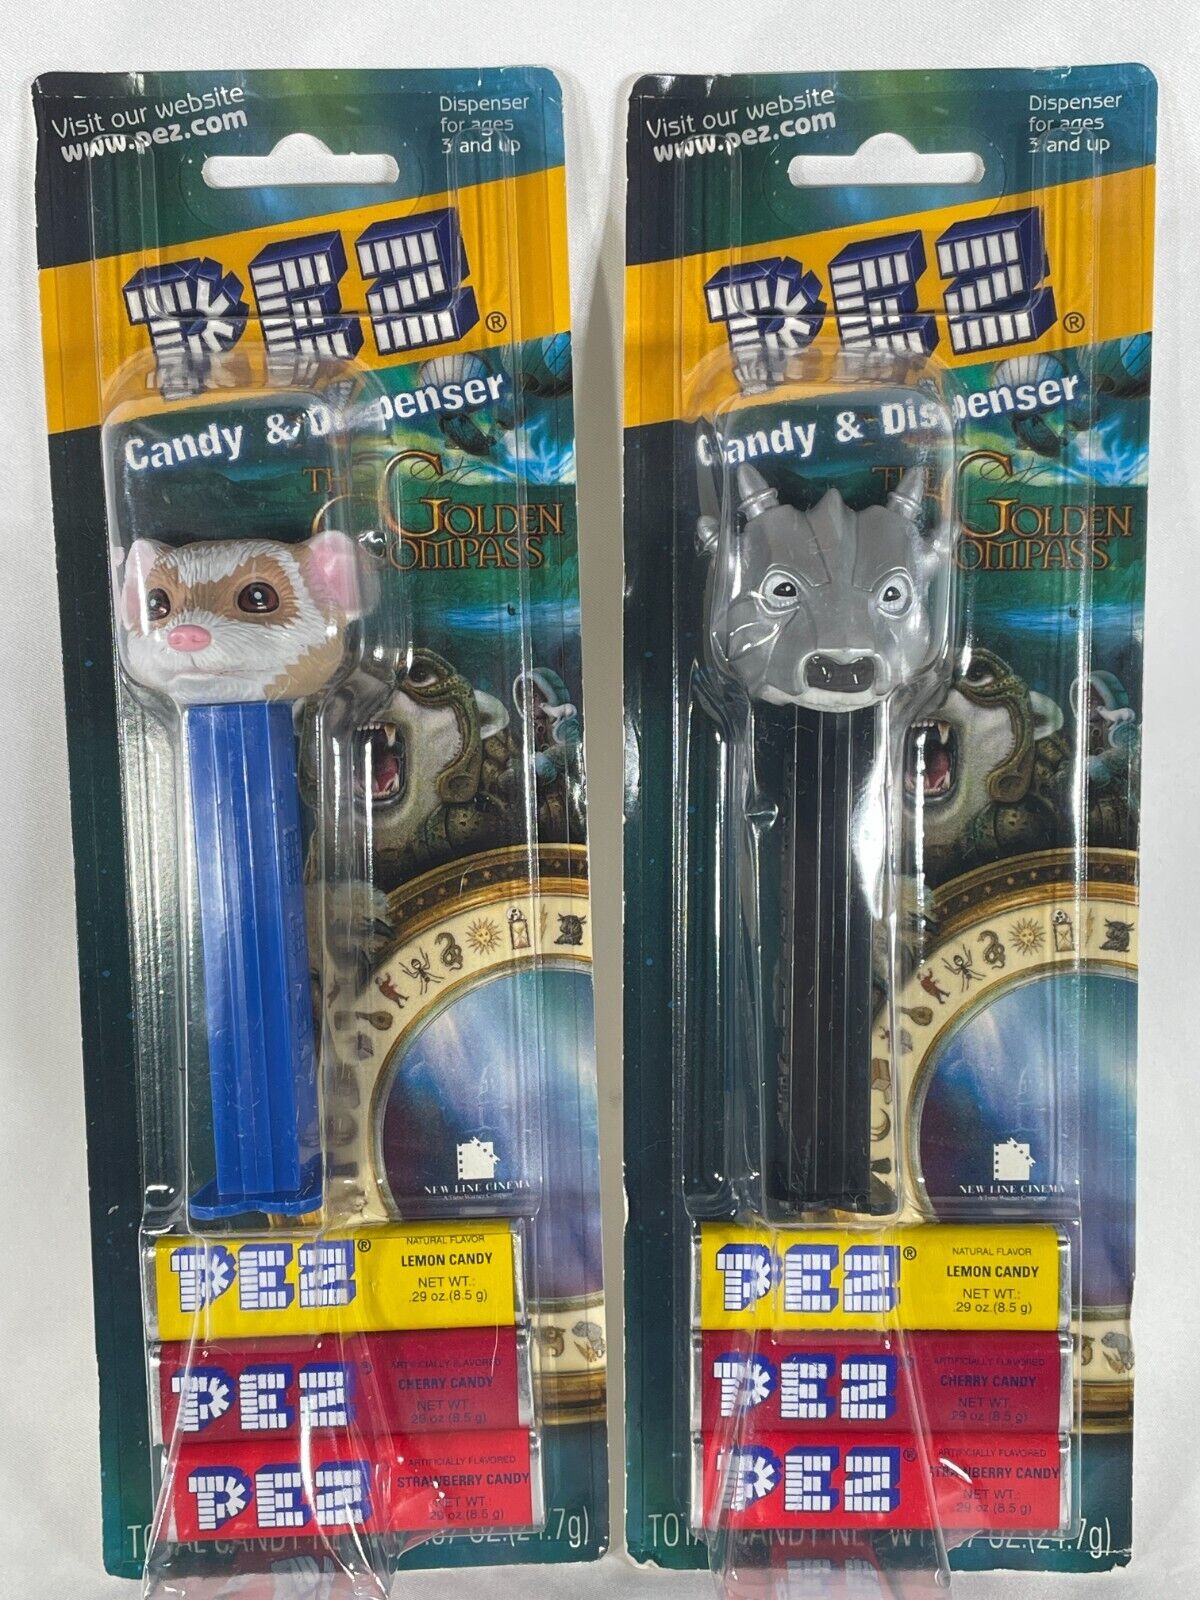 New 2007 Complete Set of Pez Golden Compass Dispensers on Cards Retired